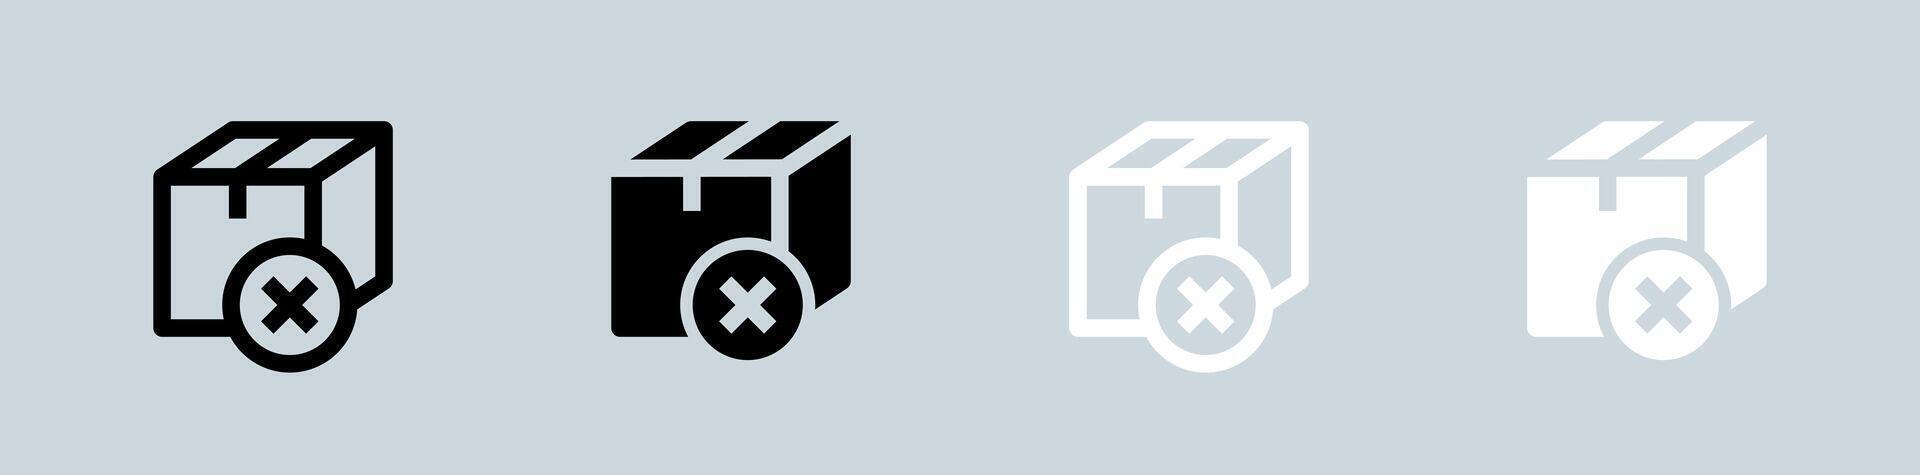 Cancel package icon set in black and white. Delivery signs vector illustration.